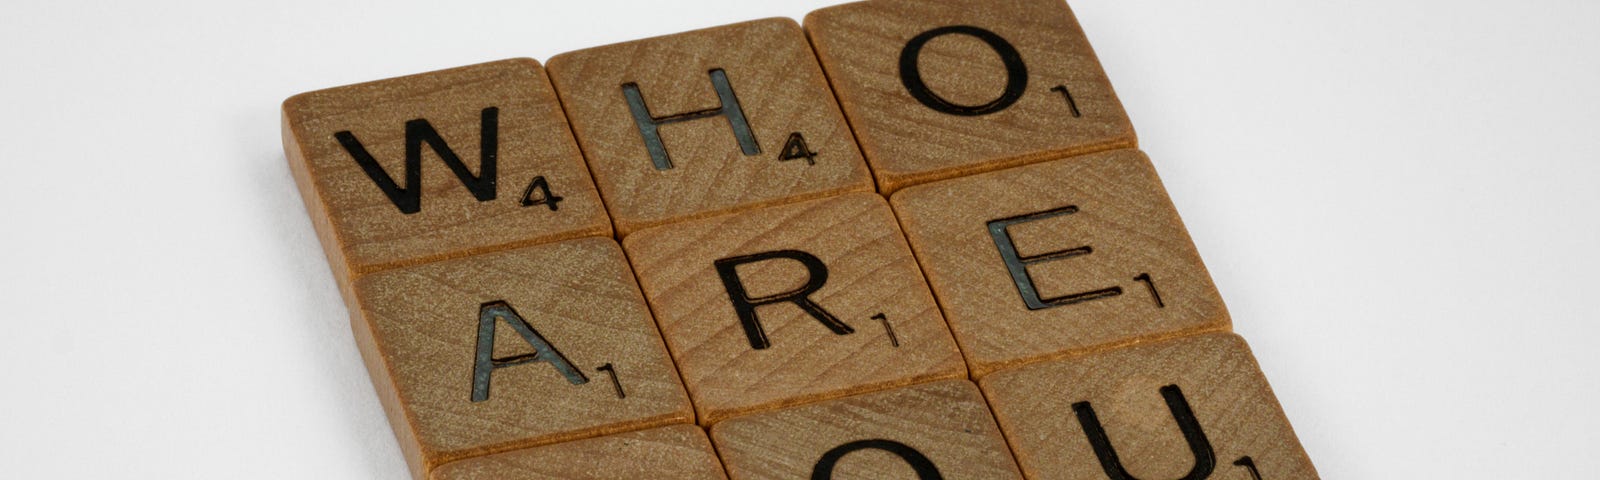 An image of Scrabble letters saying ‘who are you’, the three words displayed under each other in a square.